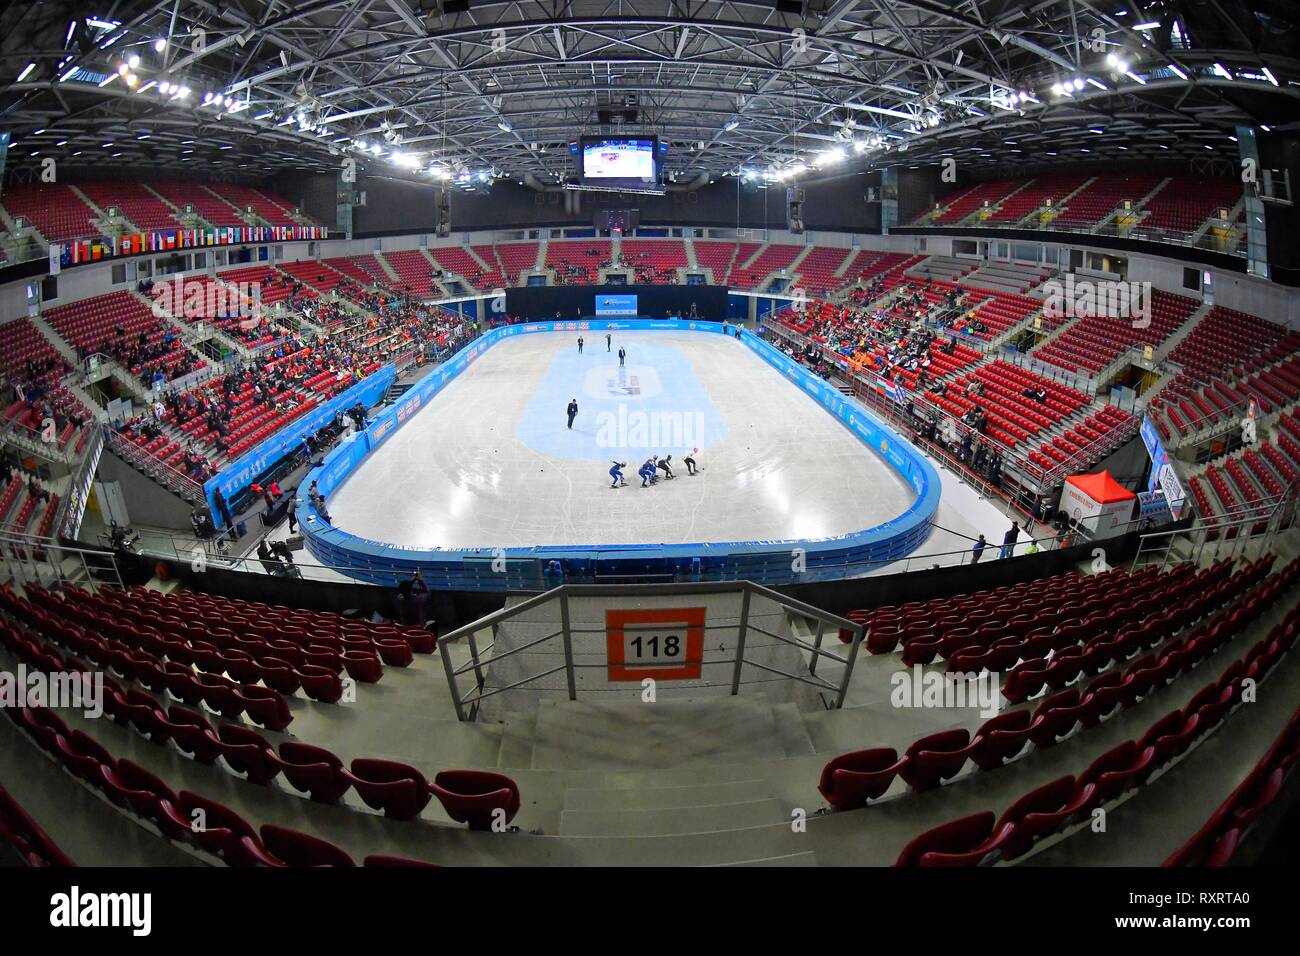 ISU Short Track World Championships on March 10 2019 at the Arena Armeec in Sofia, Bulgaria. Overview stadium Credit: Soenar Chamid/SCS/AFLO/Alamy Live News Stock Photo